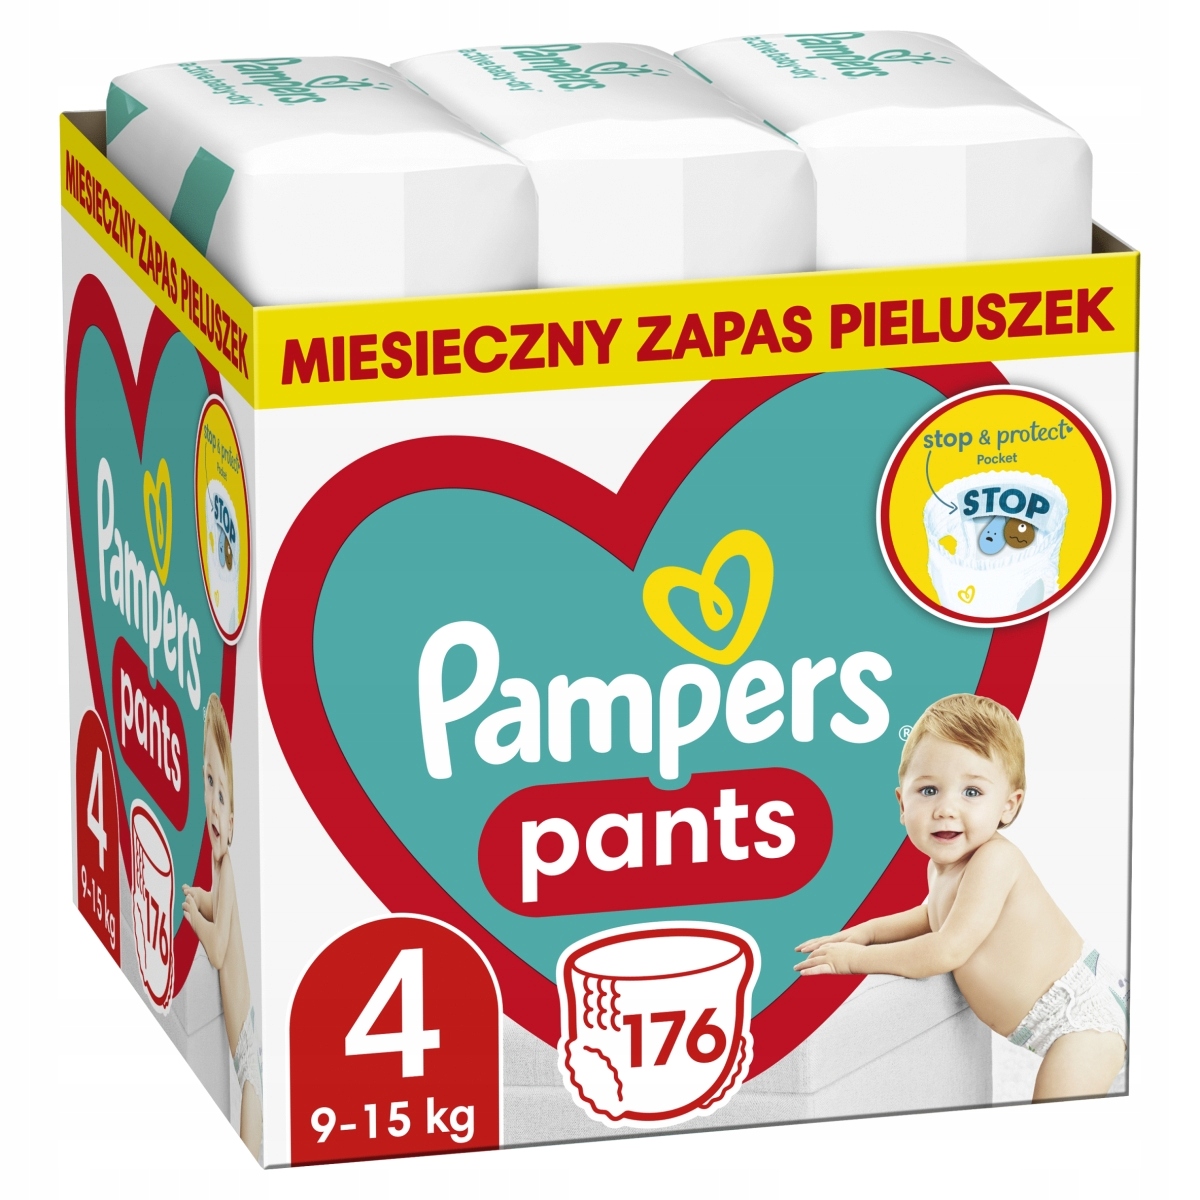 pampers premium care or baby dry